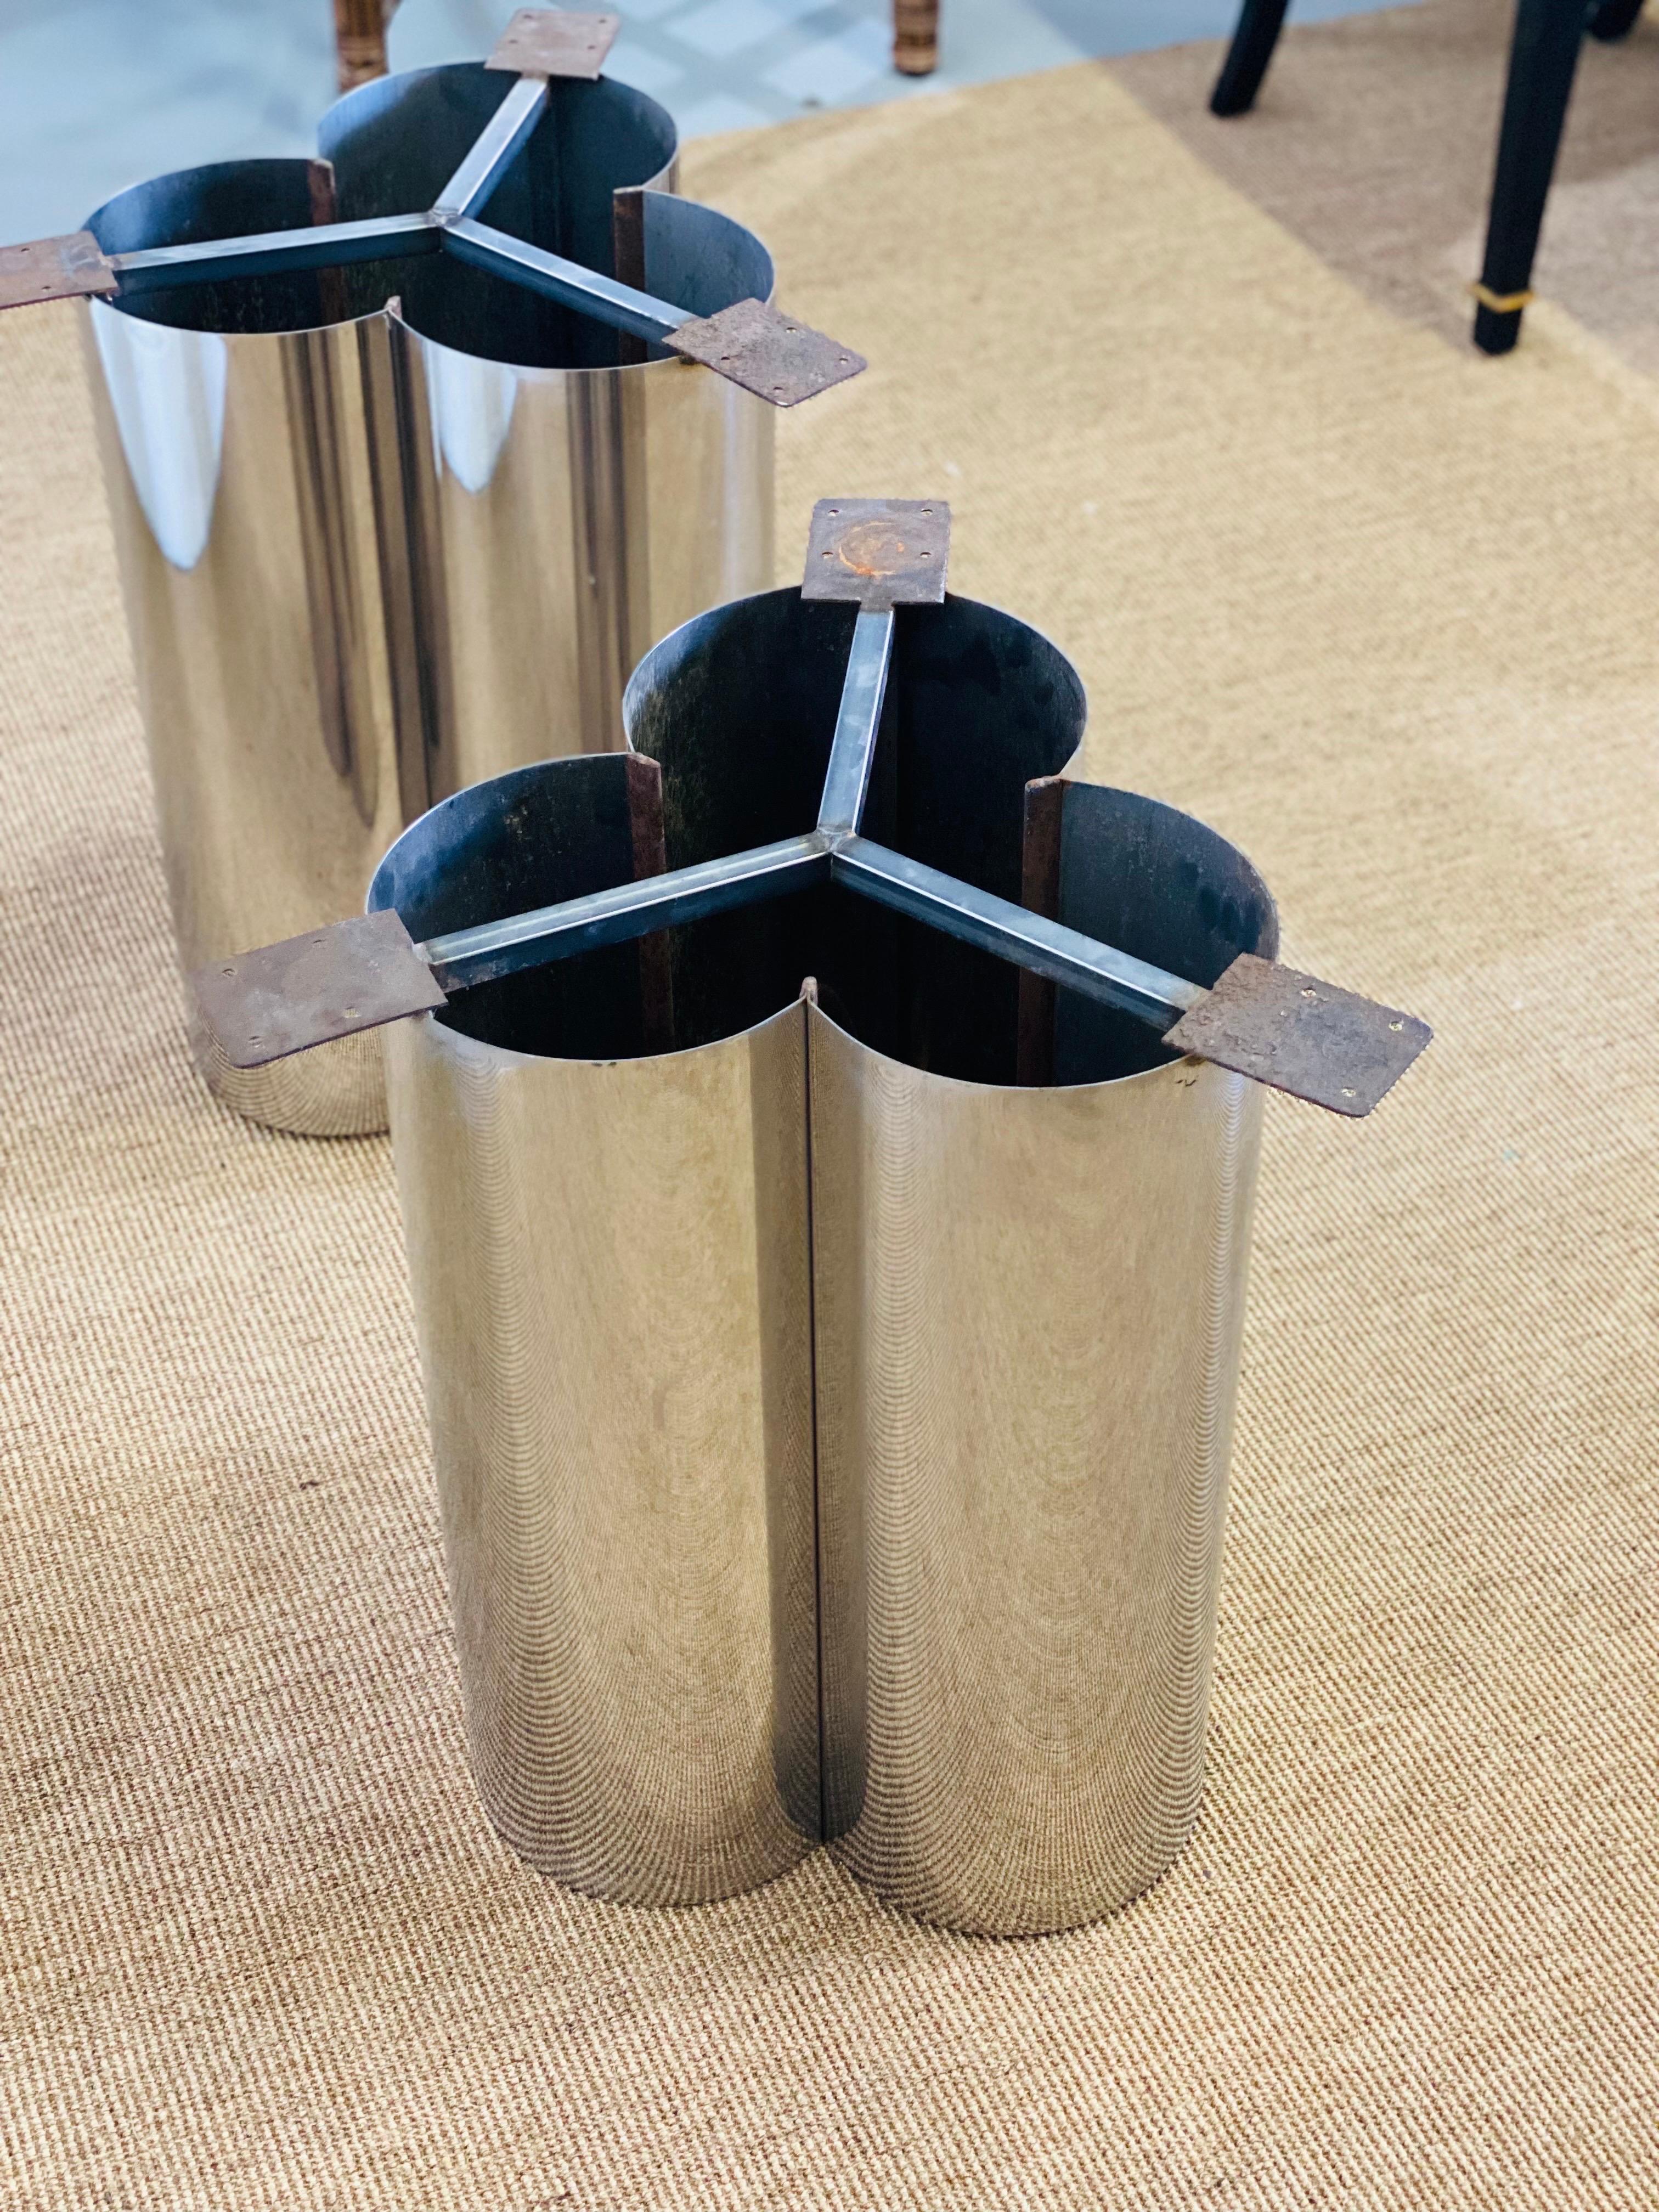 American 1970s Mastercraft Stainless Steel Table Pedestals – a Pair For Sale